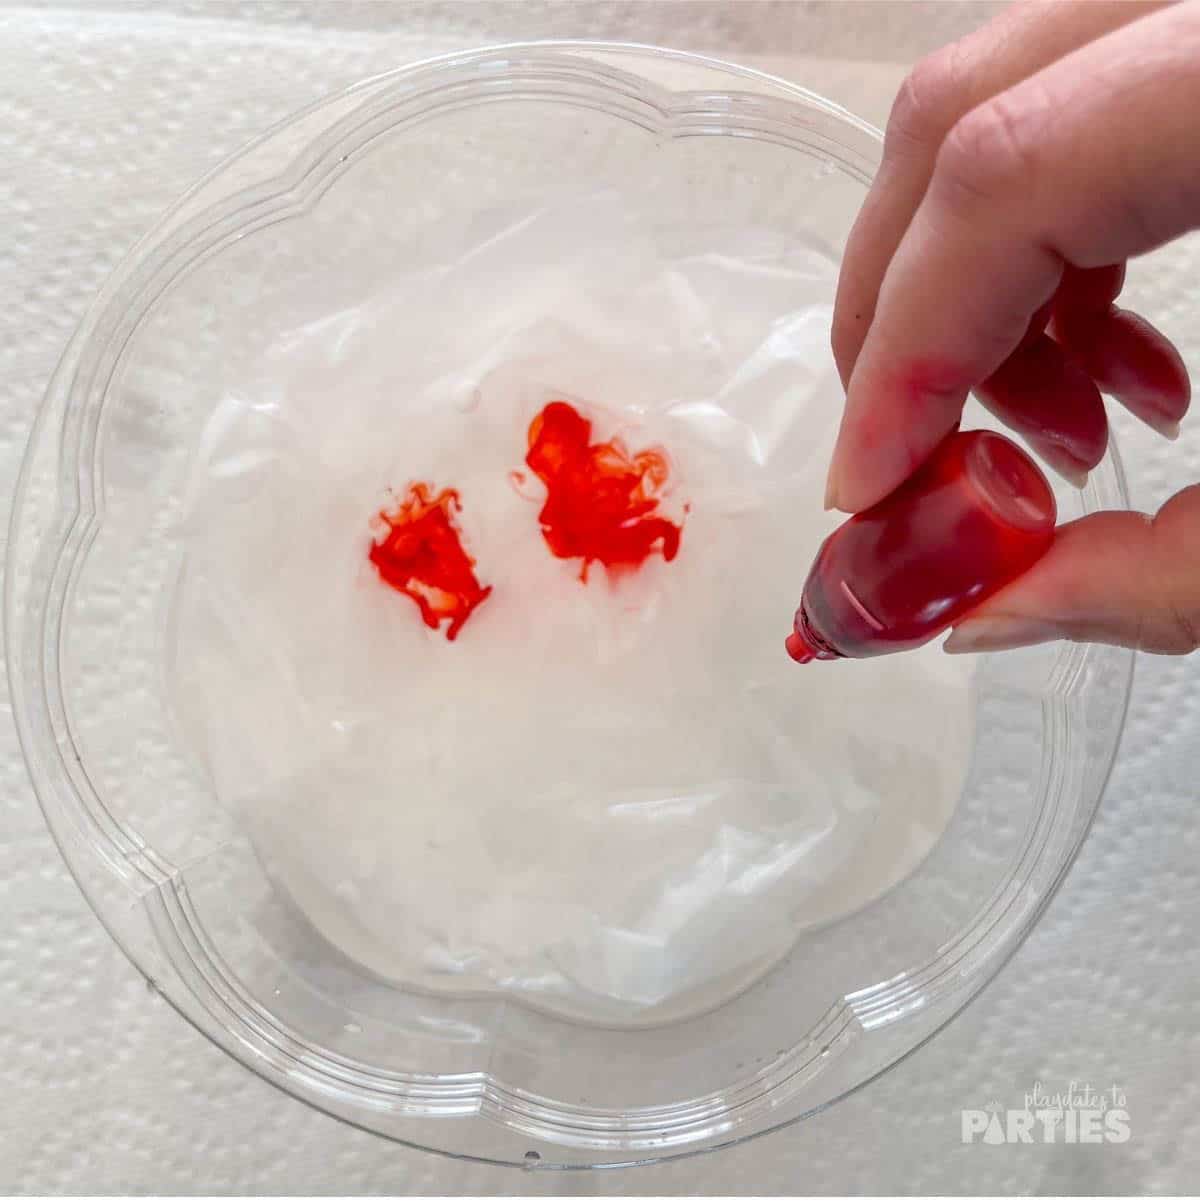 Adding food coloring to a bowl full of water with white coffee filters inside.